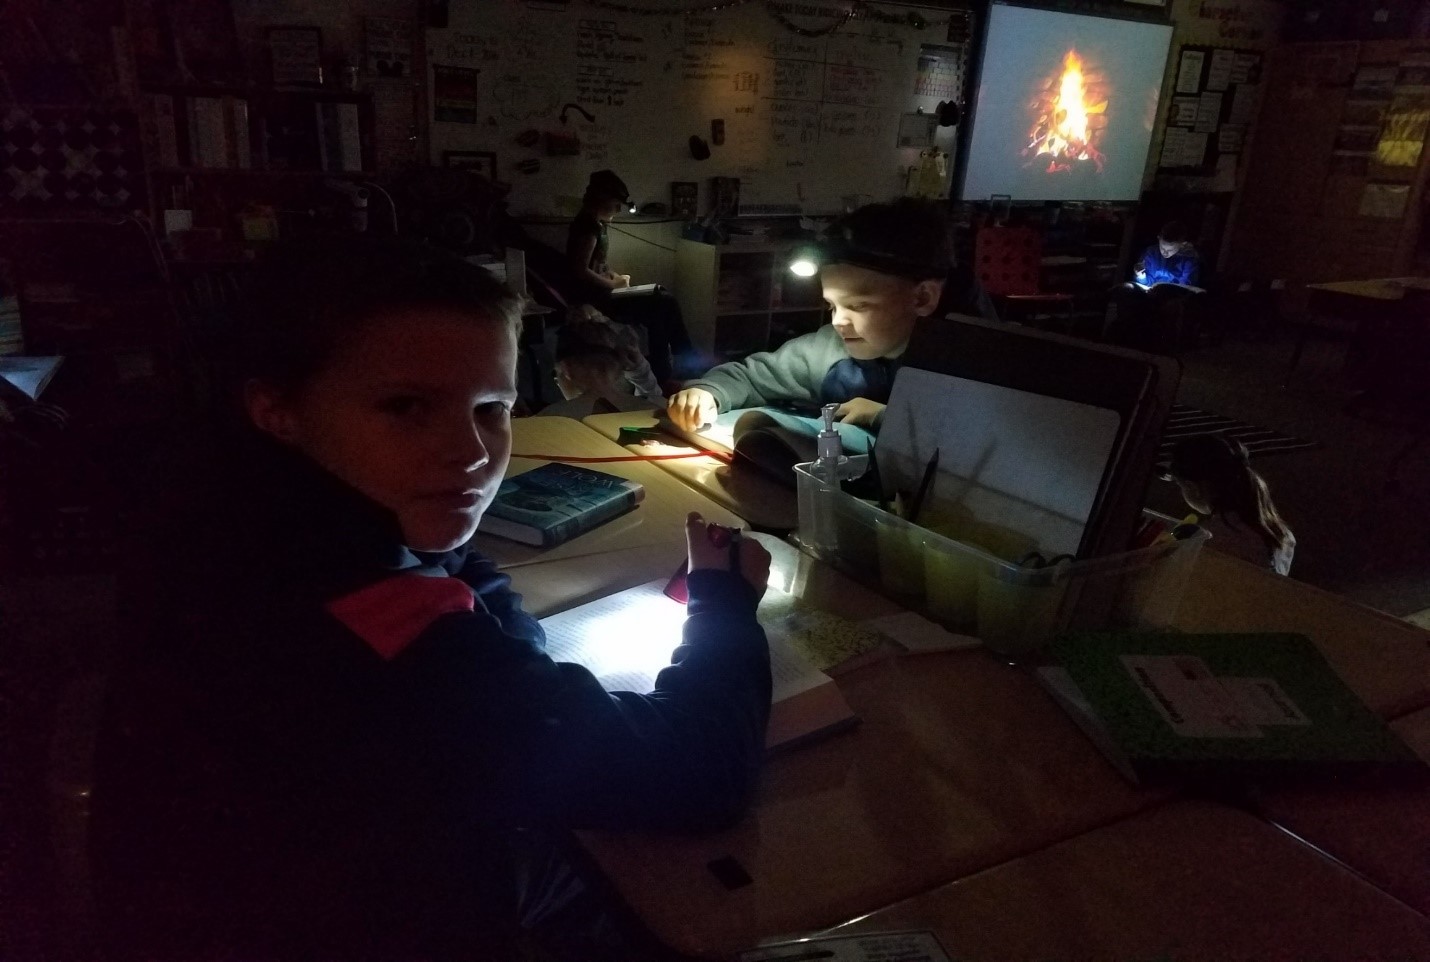 Students reading with a flashlight in the dark